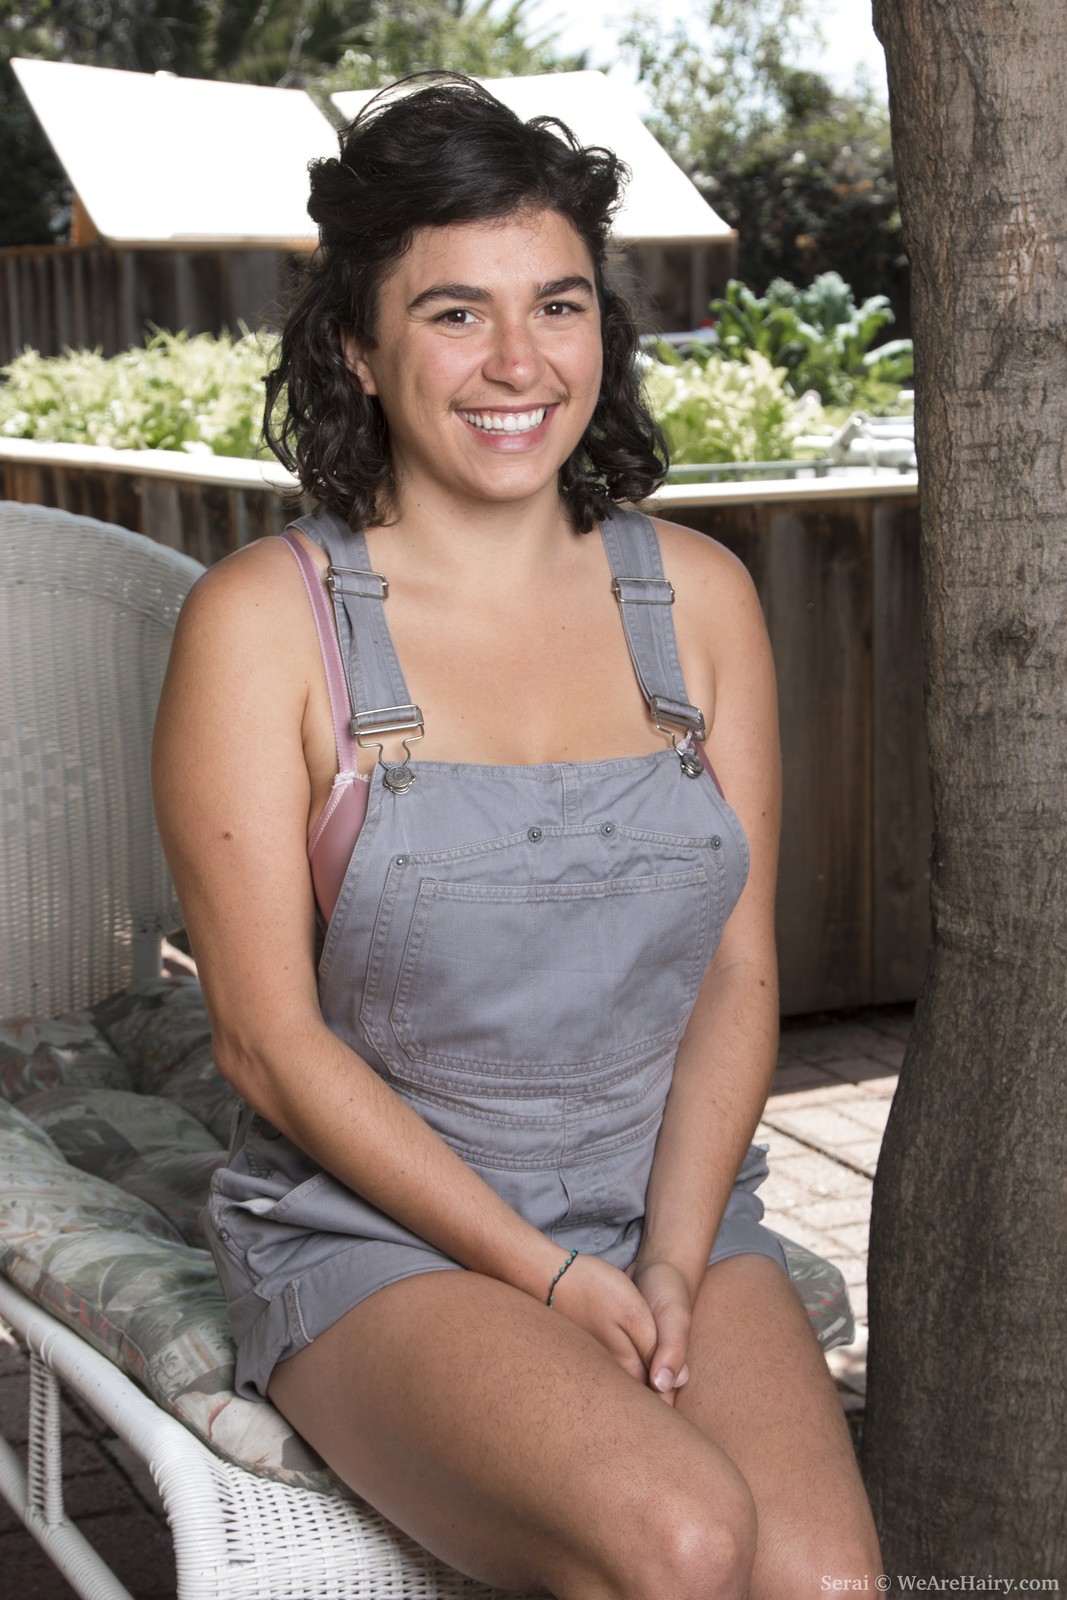 wpid-serai-takes-off-overalls-outdoors-and-gets-naked1.jpg